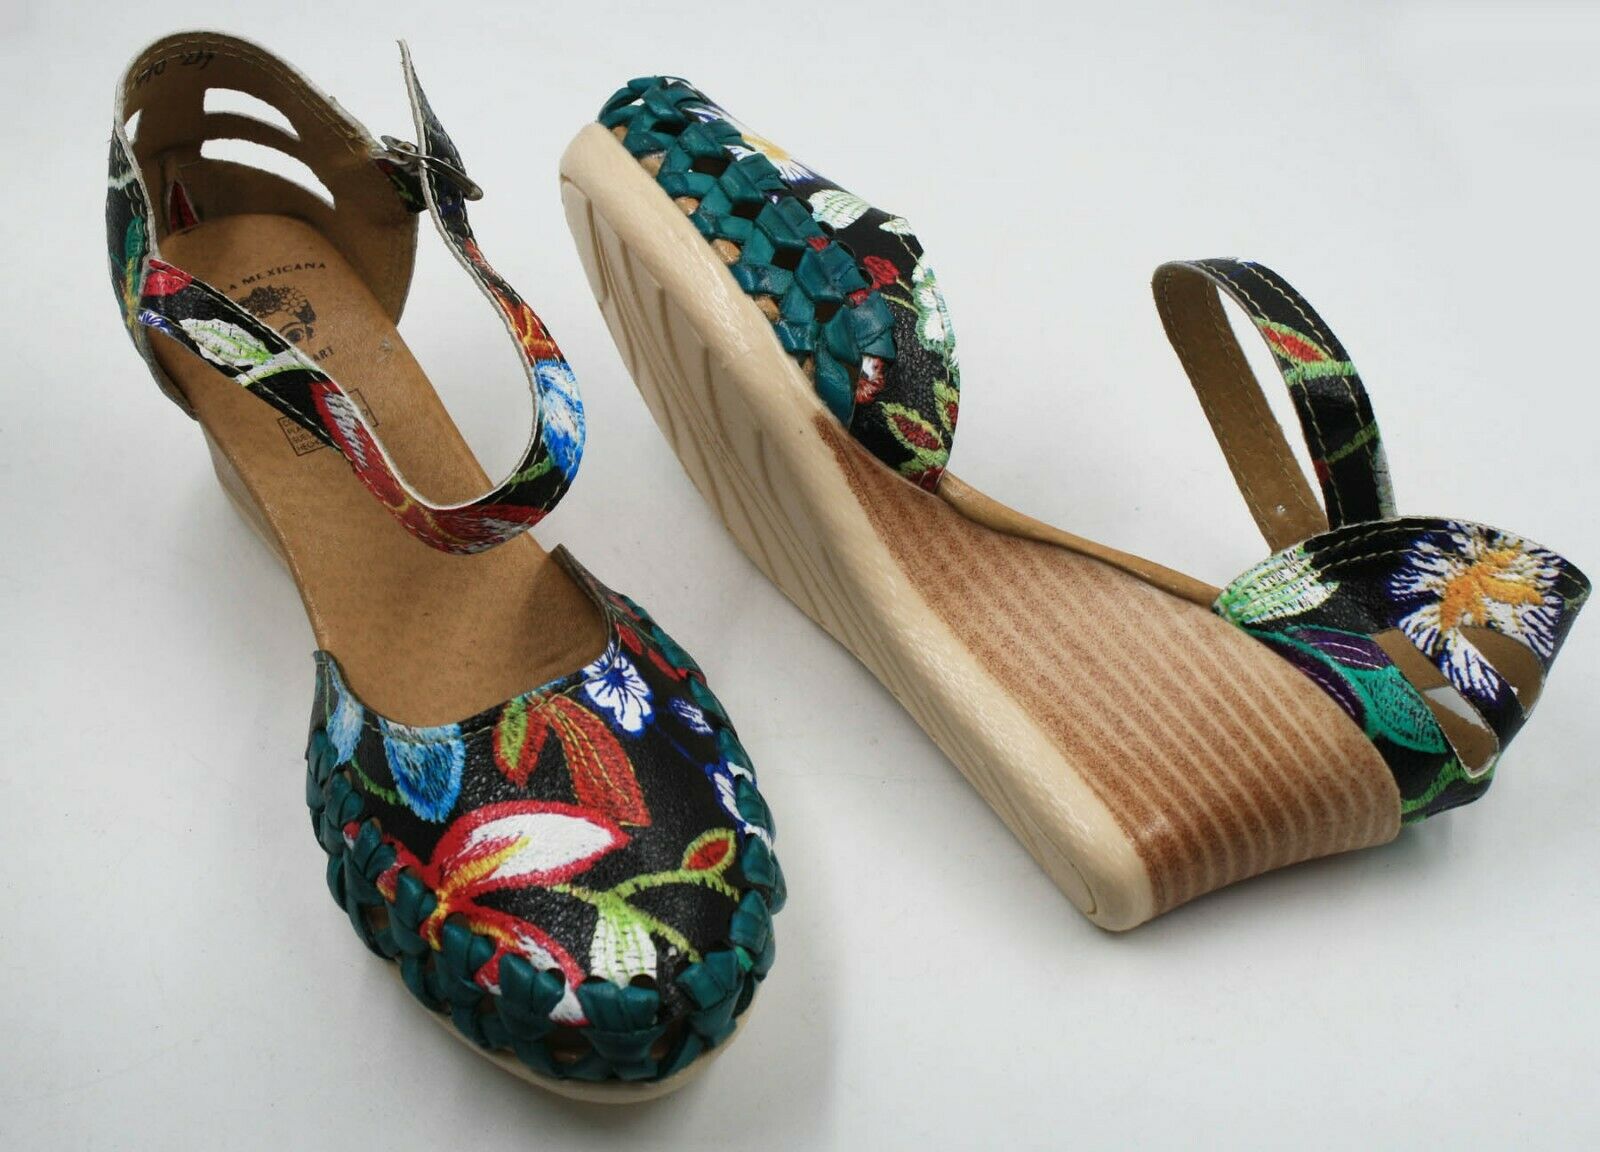 Details about  / Women Genuine Leather  Wedges Mexican Sandals with Flower Embroidery CR278